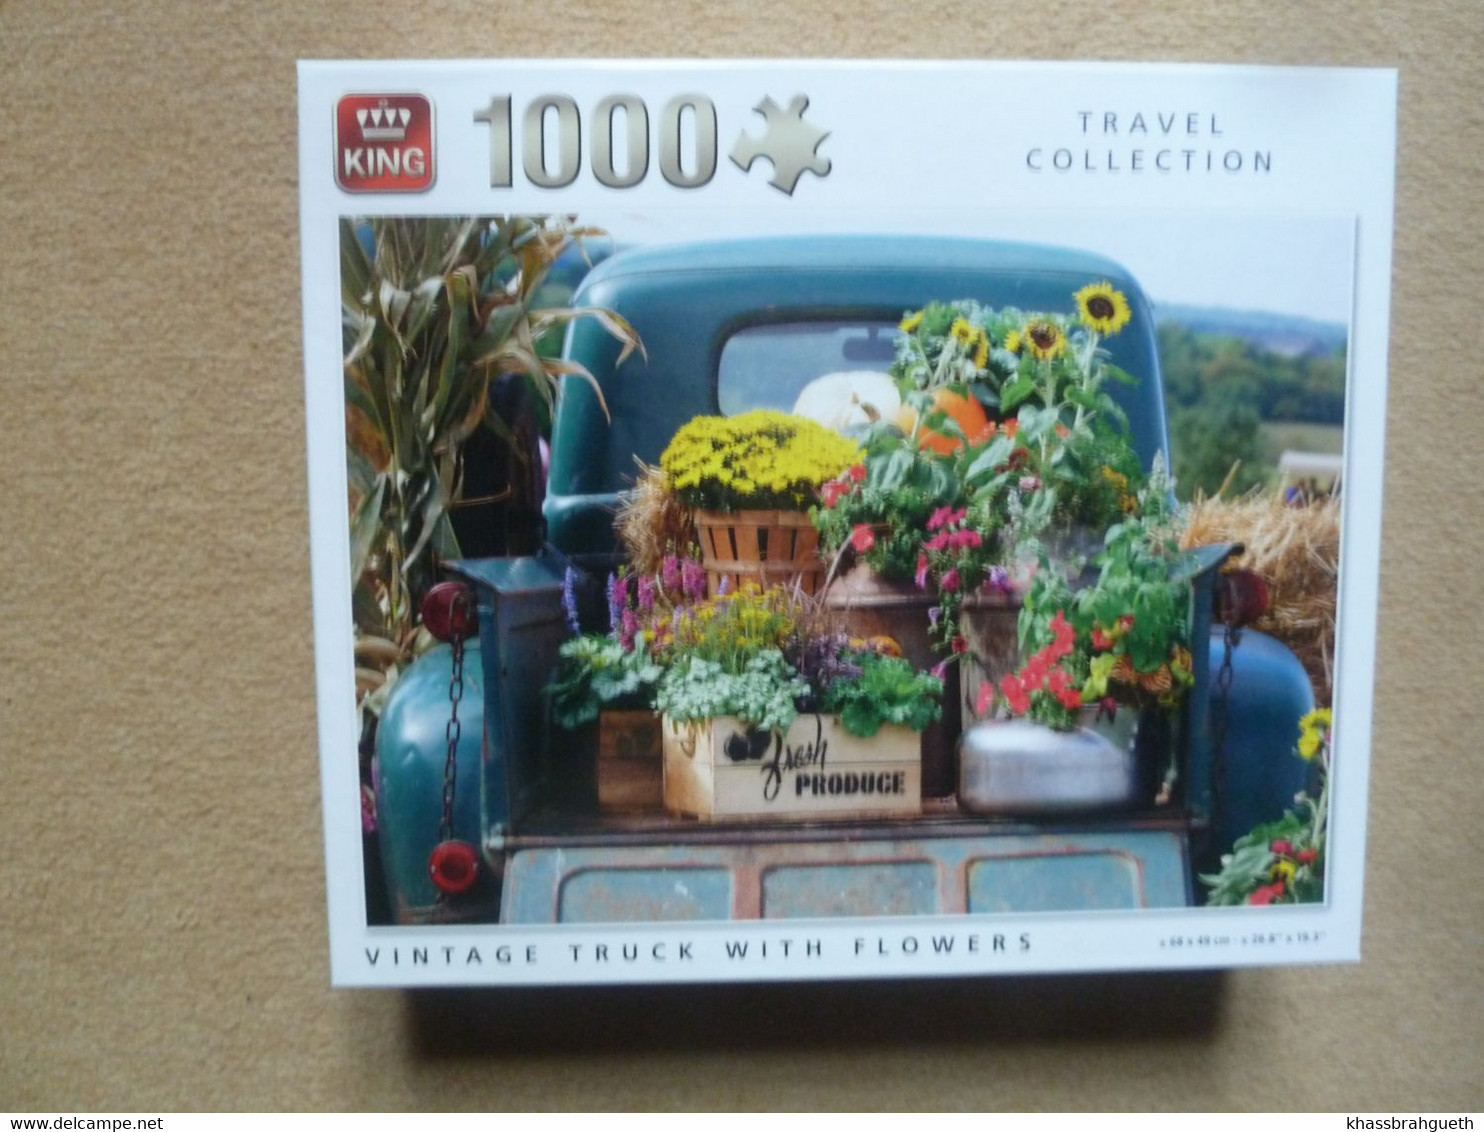 PUZZLE KING (1000 P) - TRAVEL COLLECTION - VINTAGE TRUCK WITH FLOWERS - Puzzles